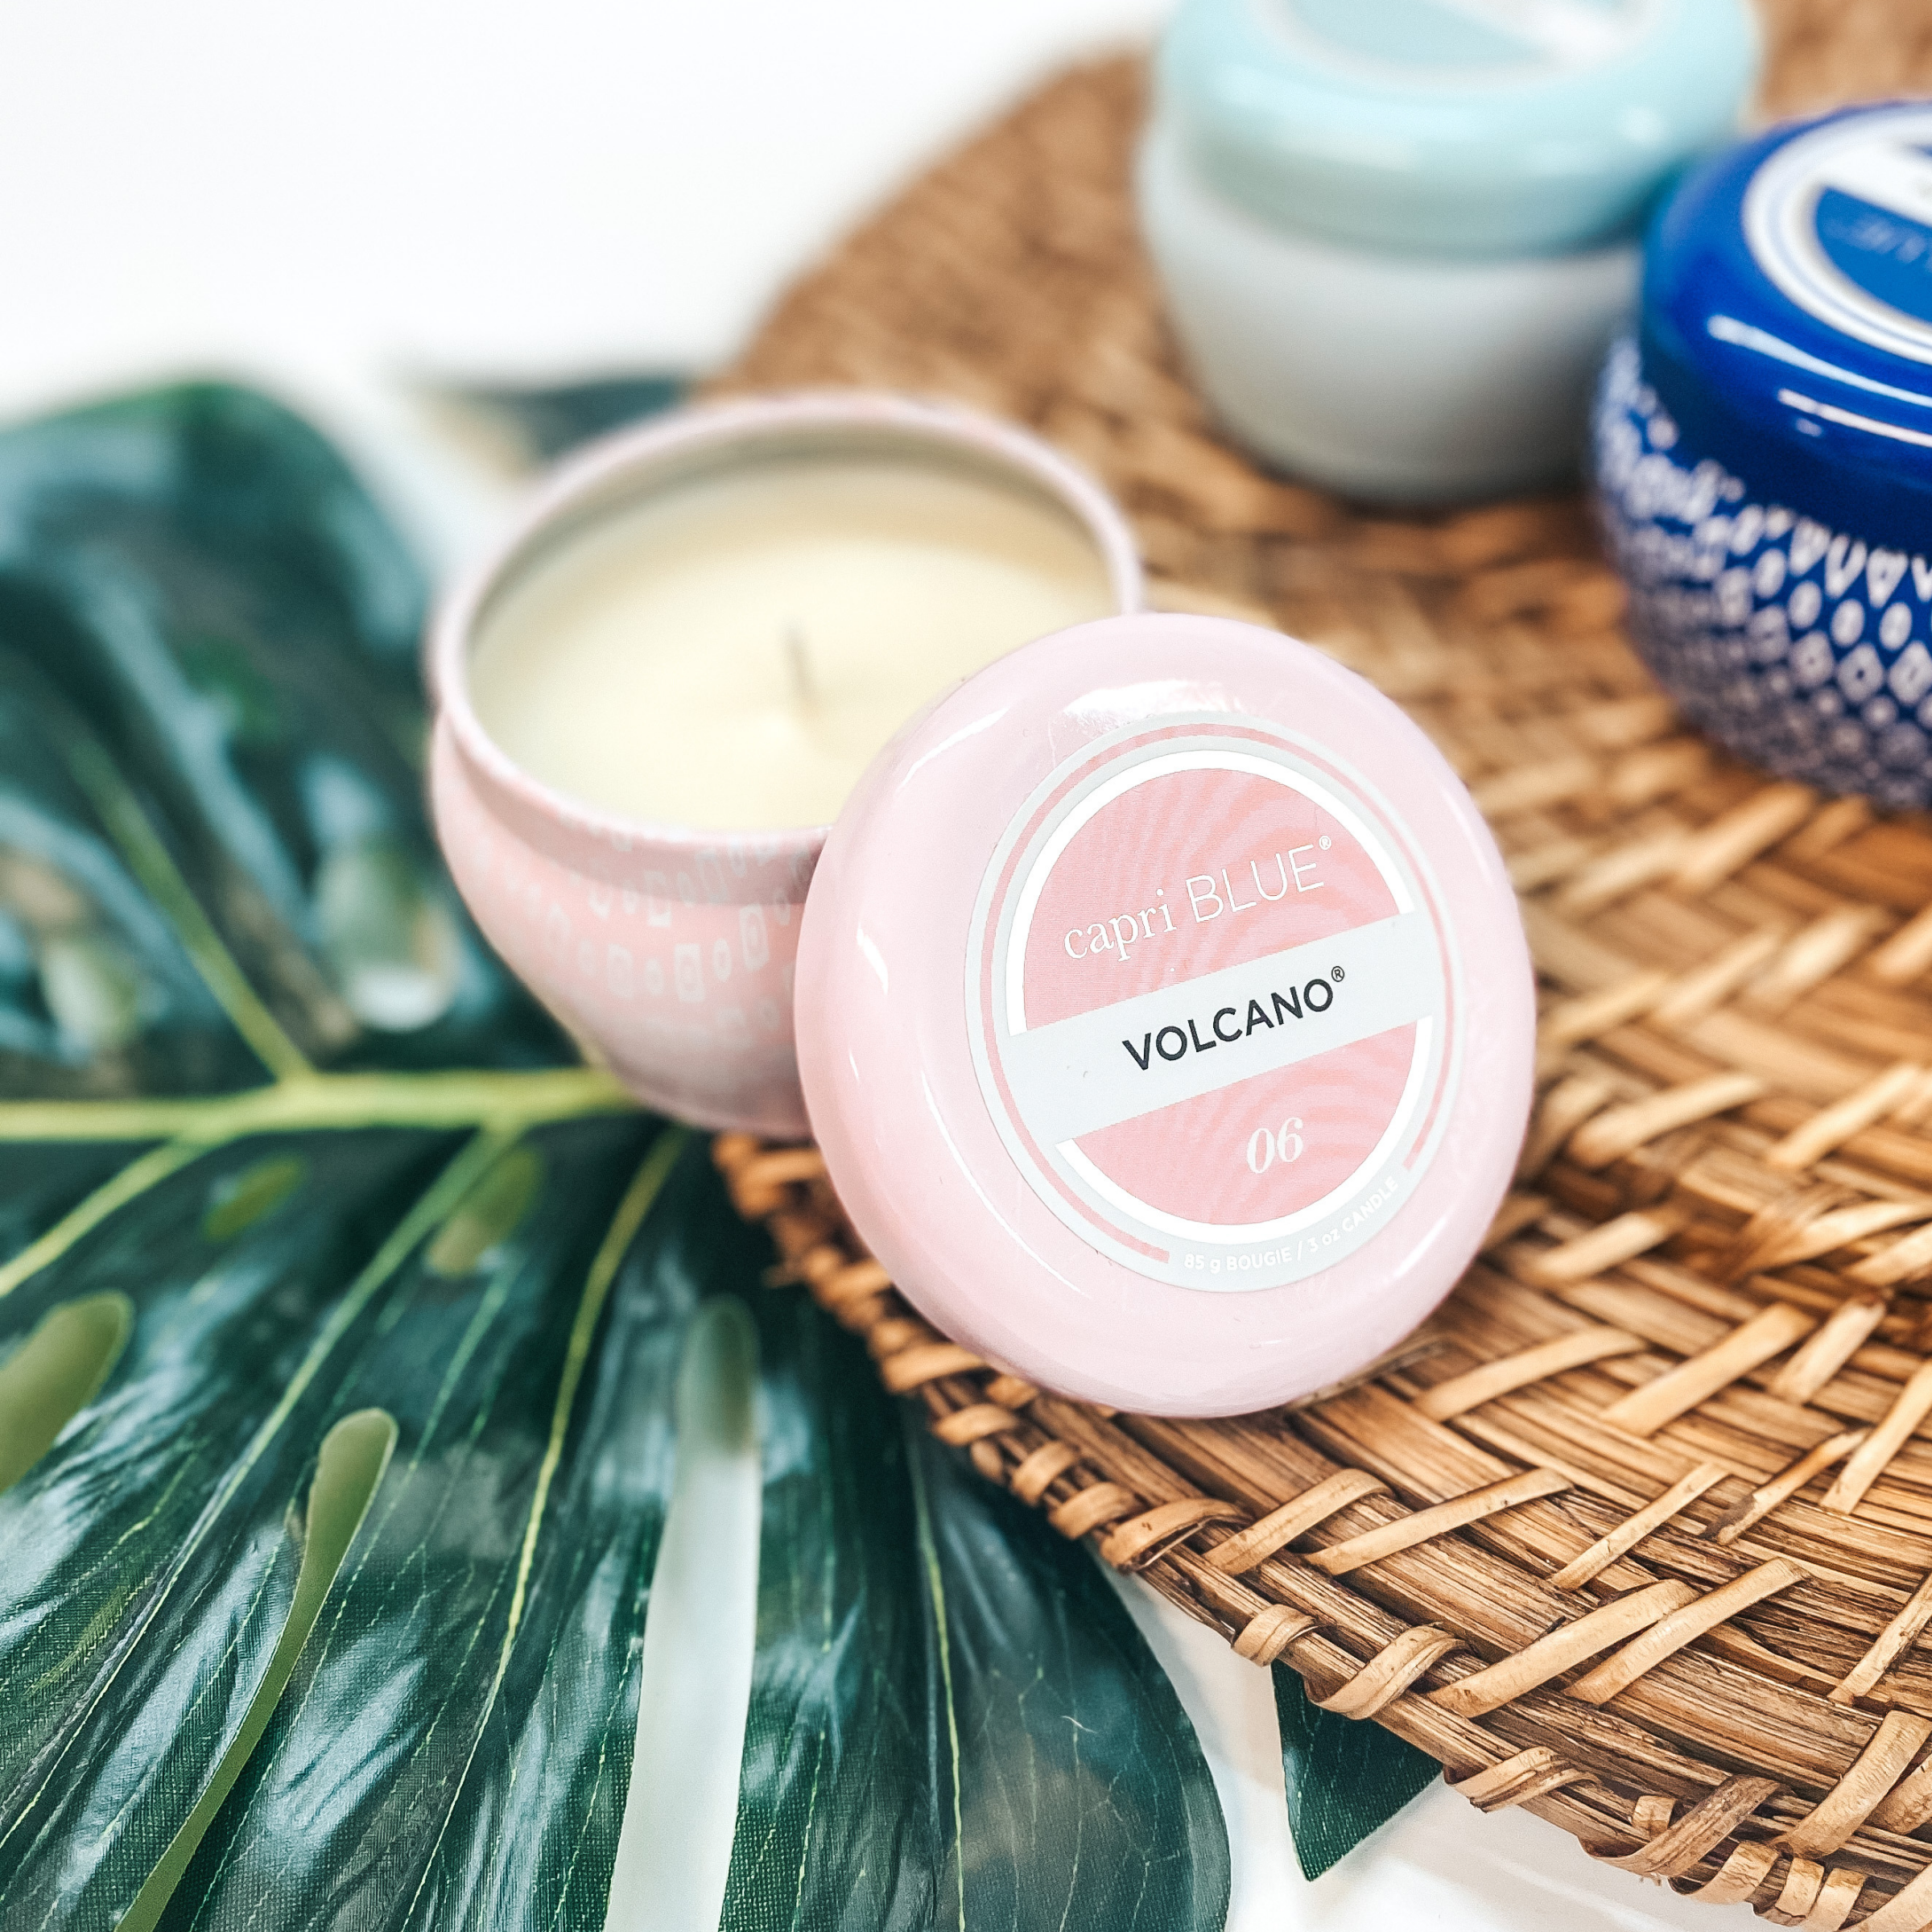 Capri Blue | 3 oz. Mini Tin Candle in Bubblegum Pink | Volcano - Giddy Up Glamour Boutique